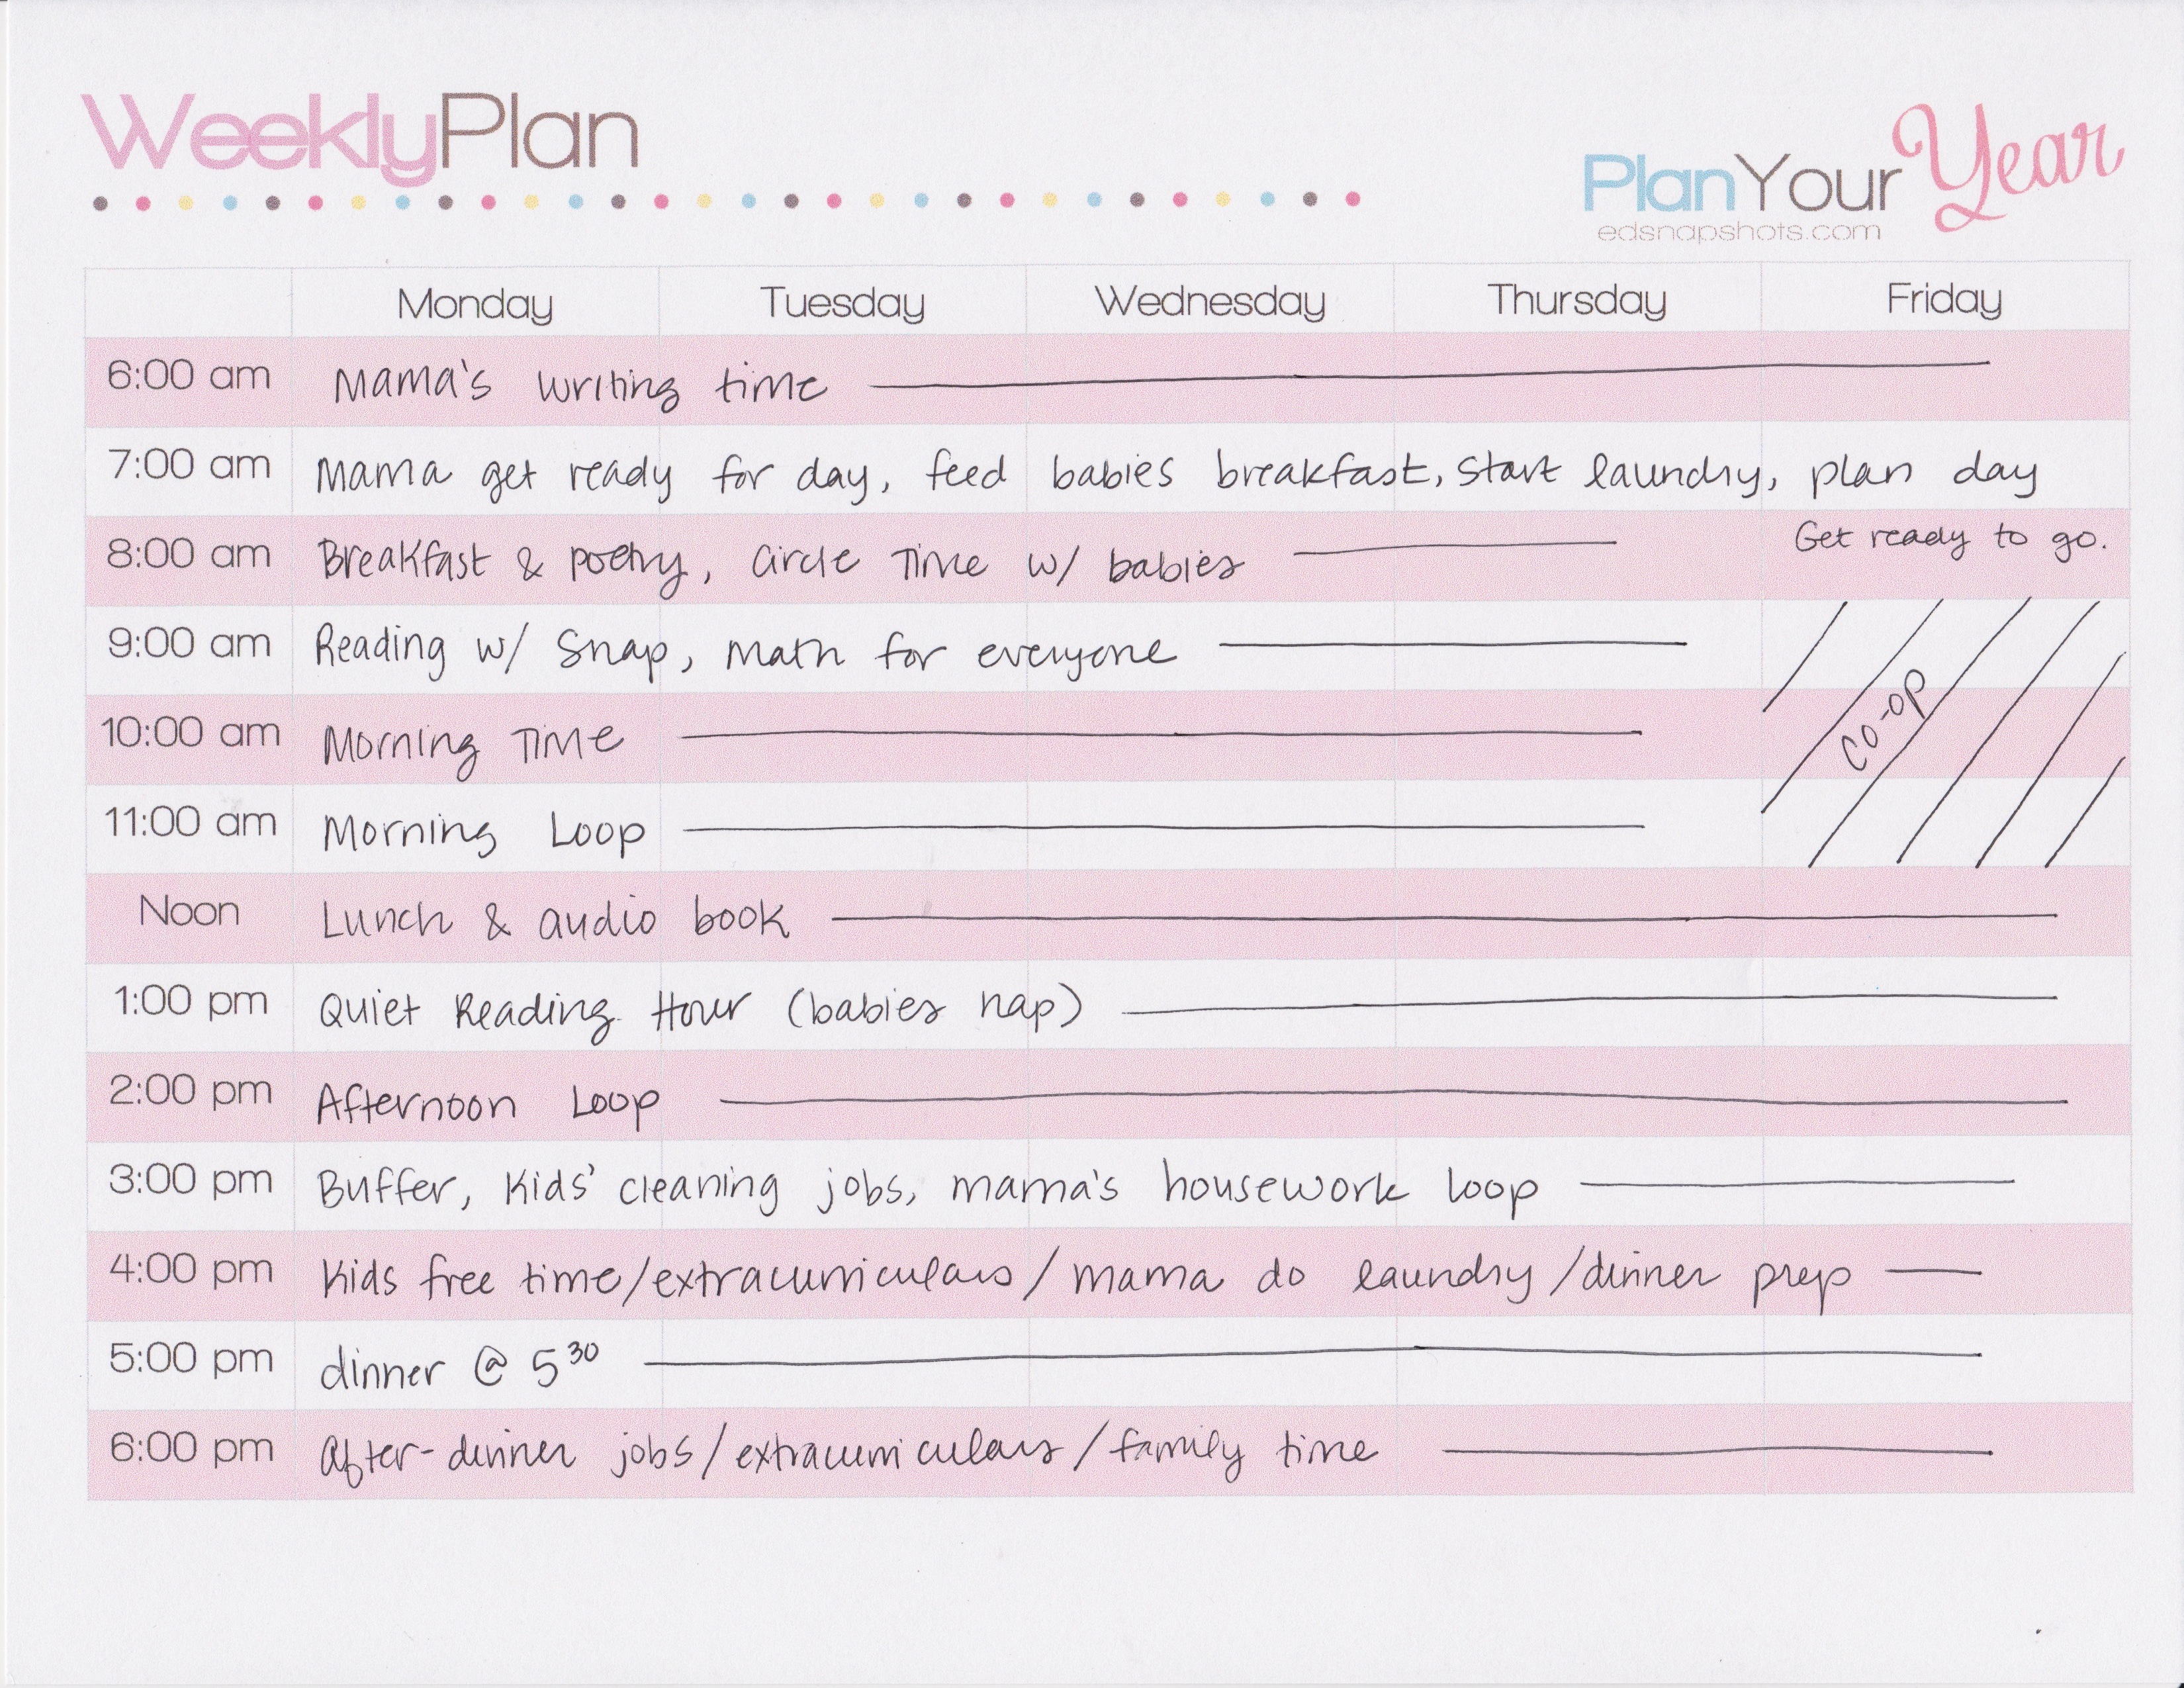 Weekly Plan Overview